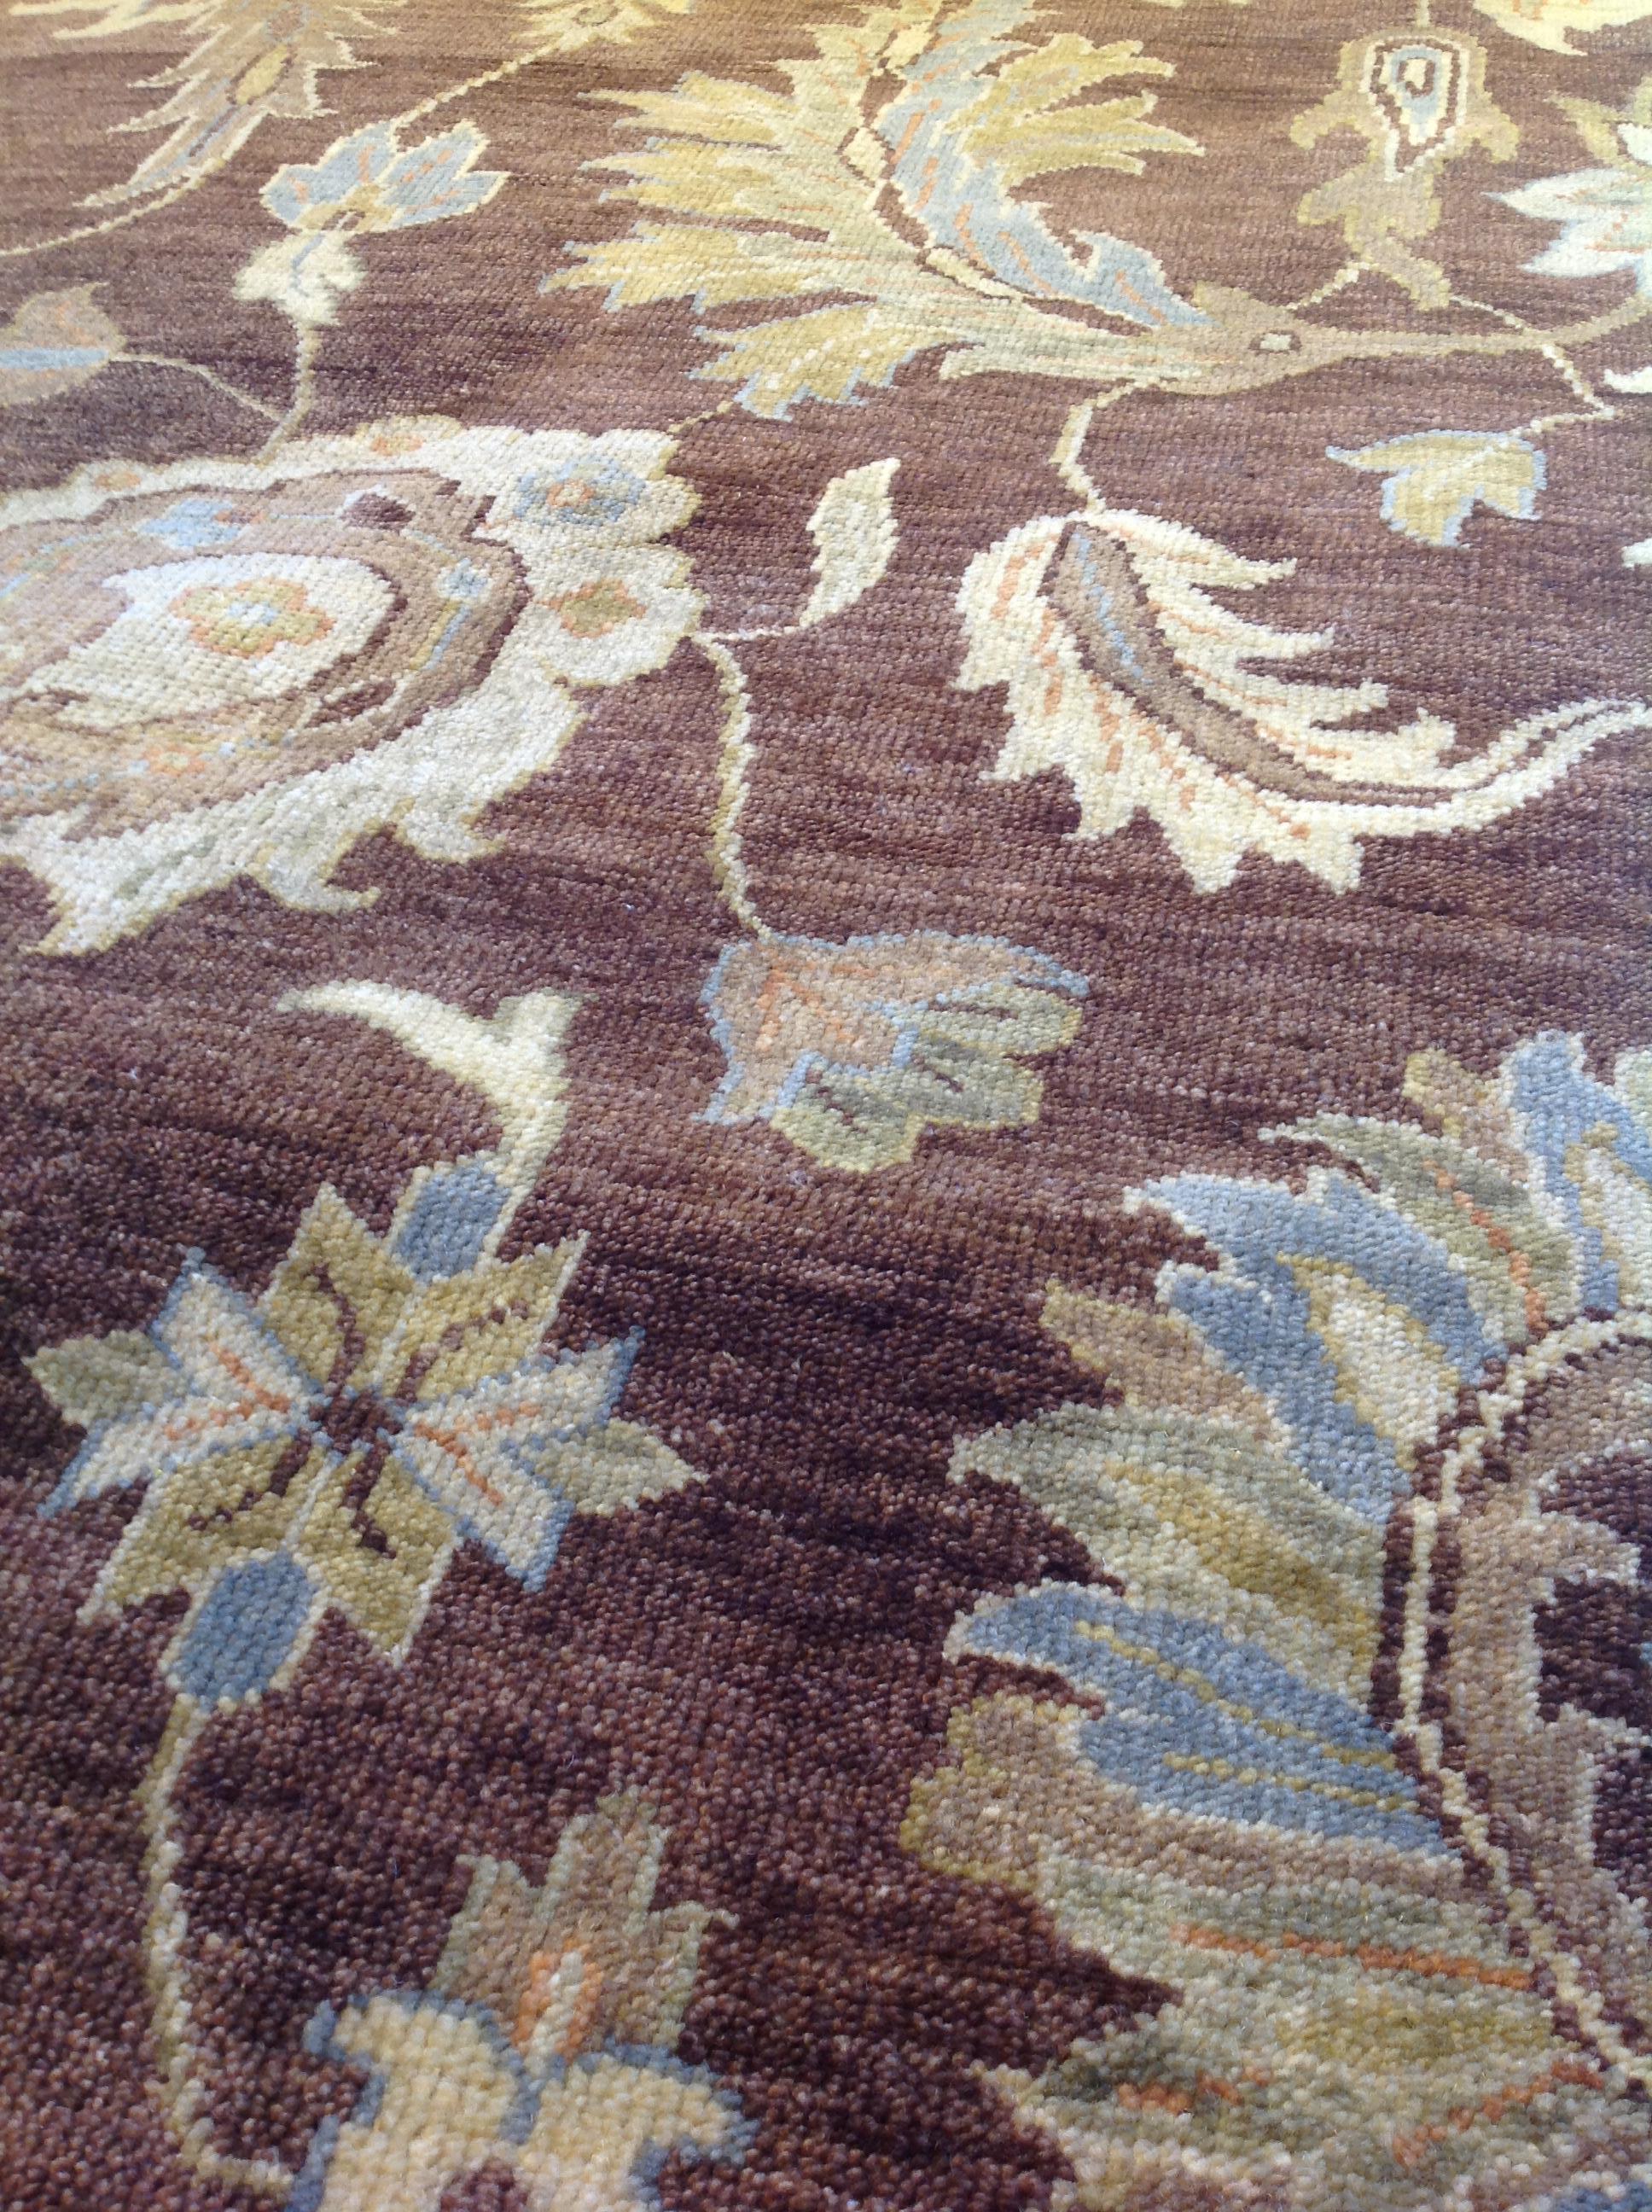 Oushak rugs are known for displaying a calm, tame look but the use of bold brown and blue in this present-day example is anything but boring. A wonderfully balanced floral center panel and contrasting border bring tradition seamlessly into today's